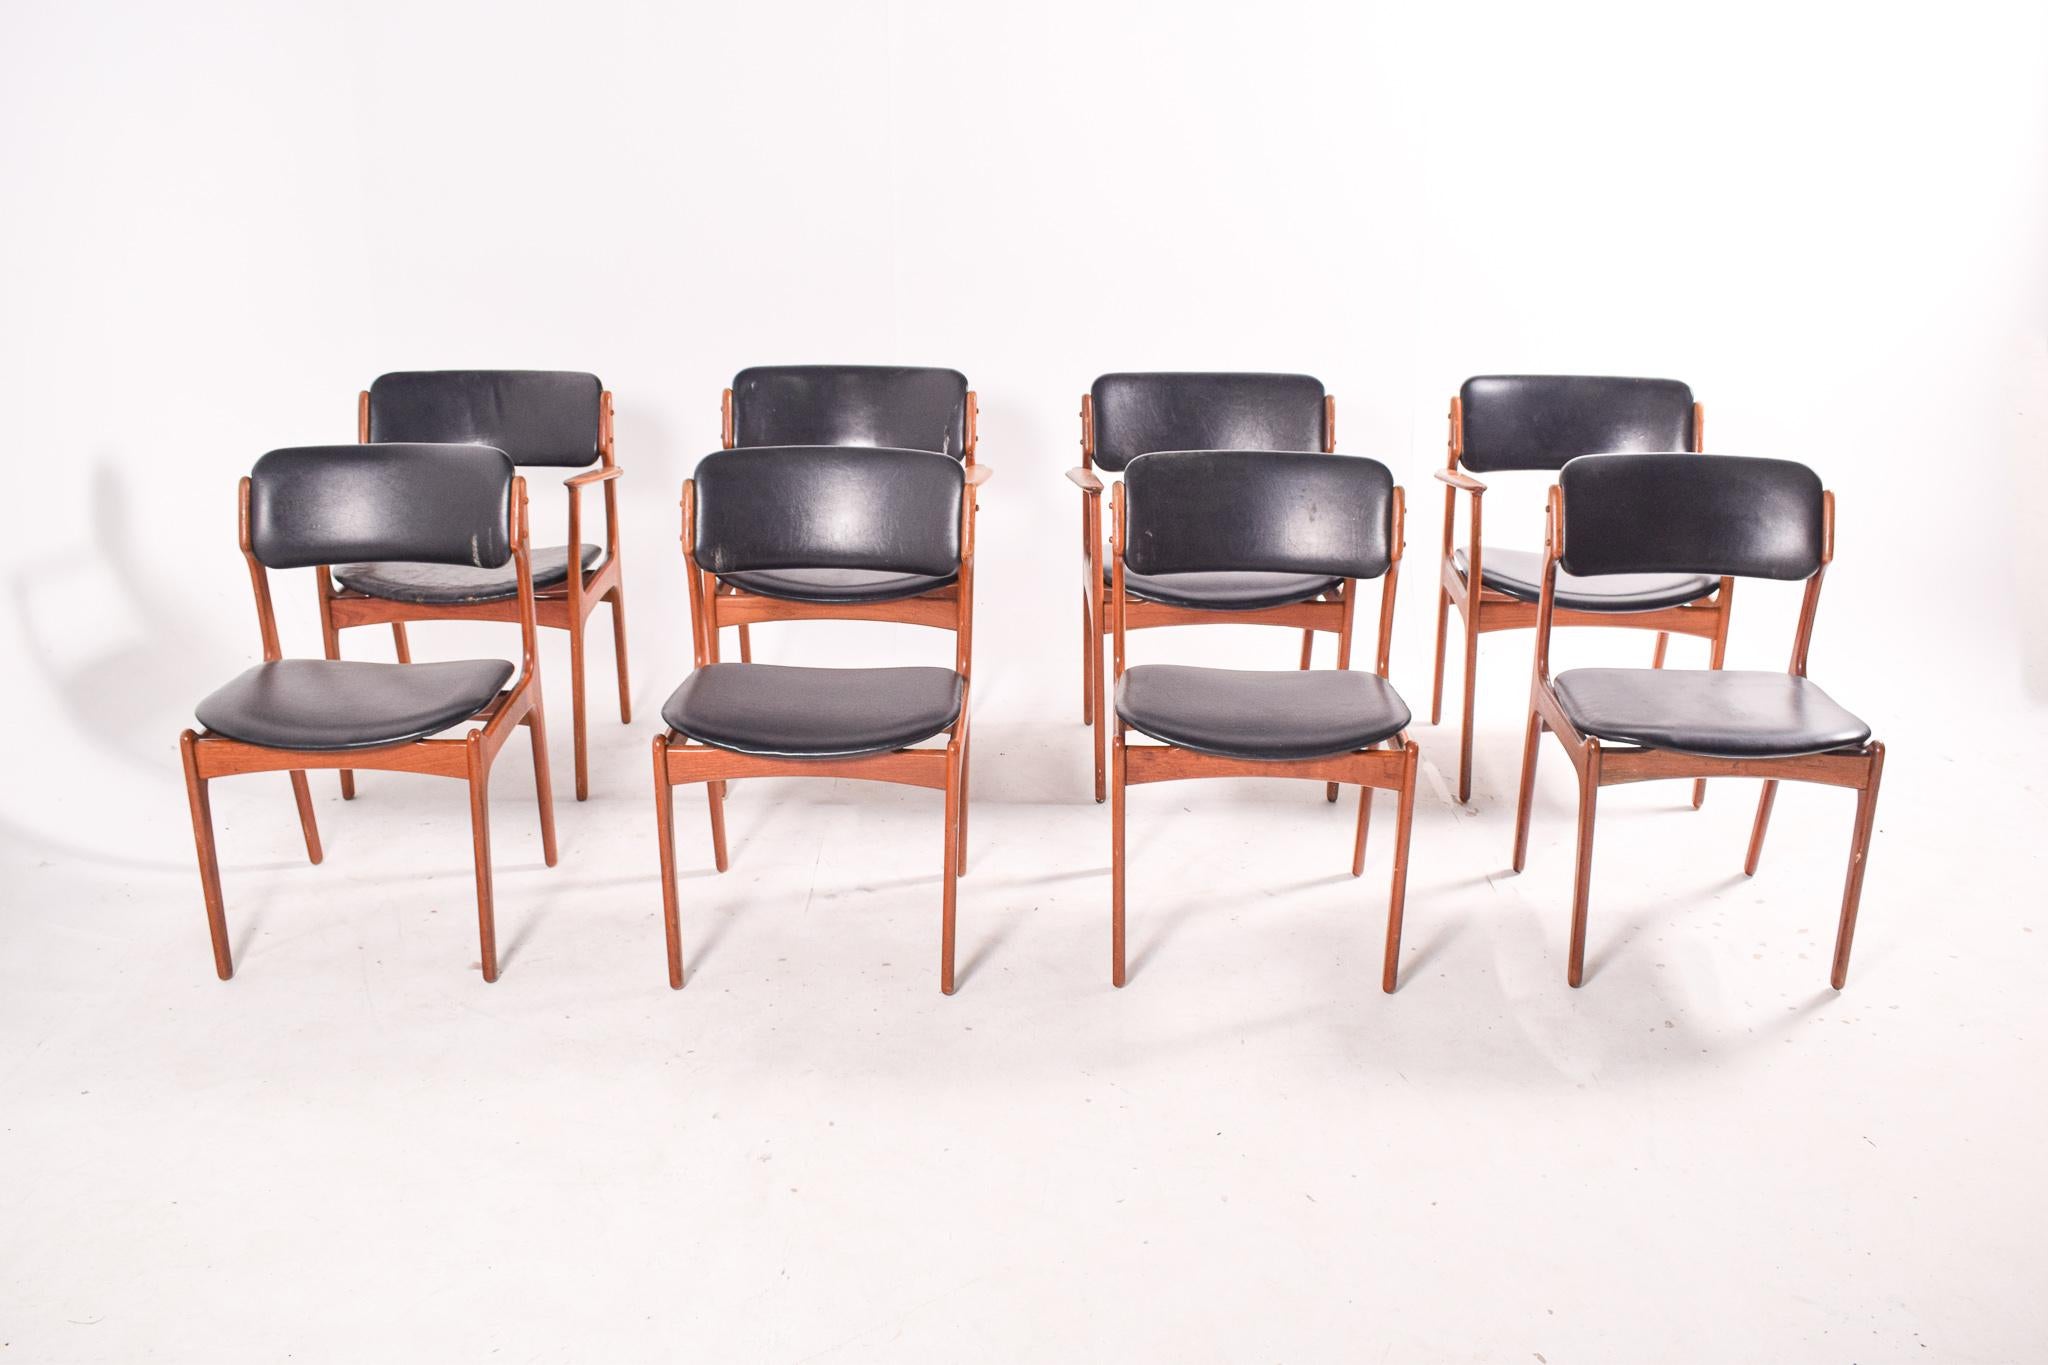 Very fine set of one of the iconic Danish dining chair designs. Model 49 by Erik Buch. Four chairs in teak with arms and 4 without. Dining chairs with floating seat make by Oddense Maskinsnedkeri. The chairs have a simple solid construction with